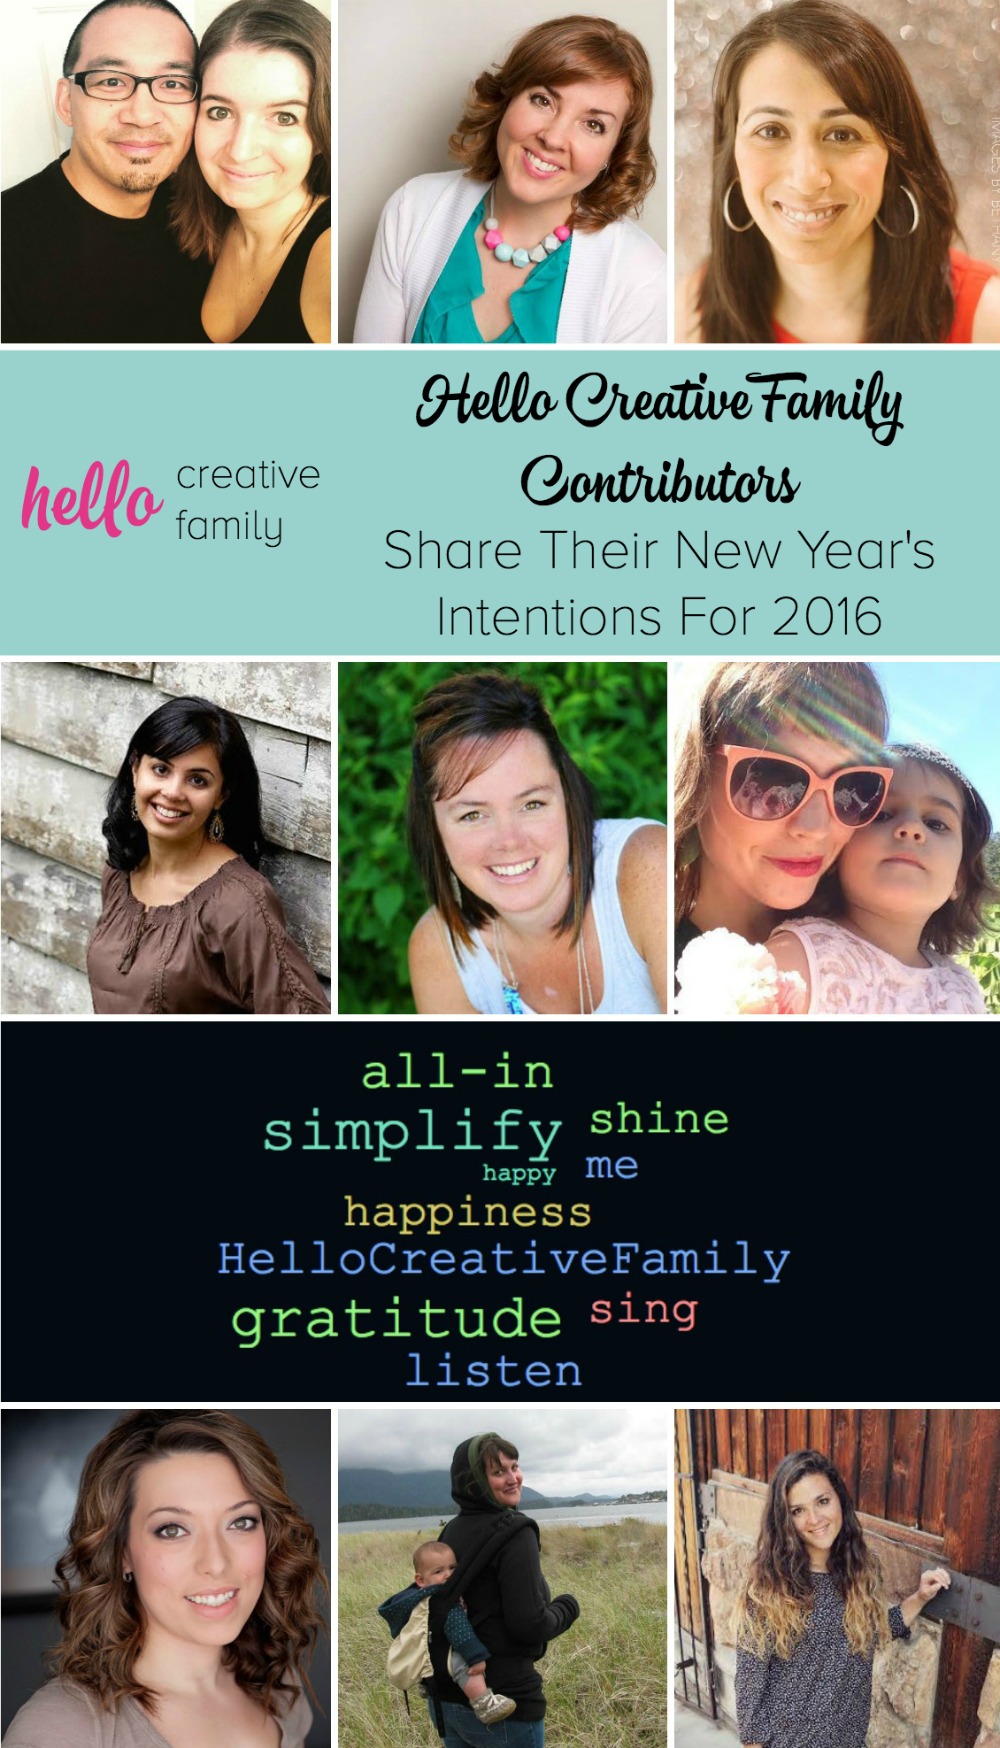 Hello Creative Family Contributors Share Their New Year's Intentions